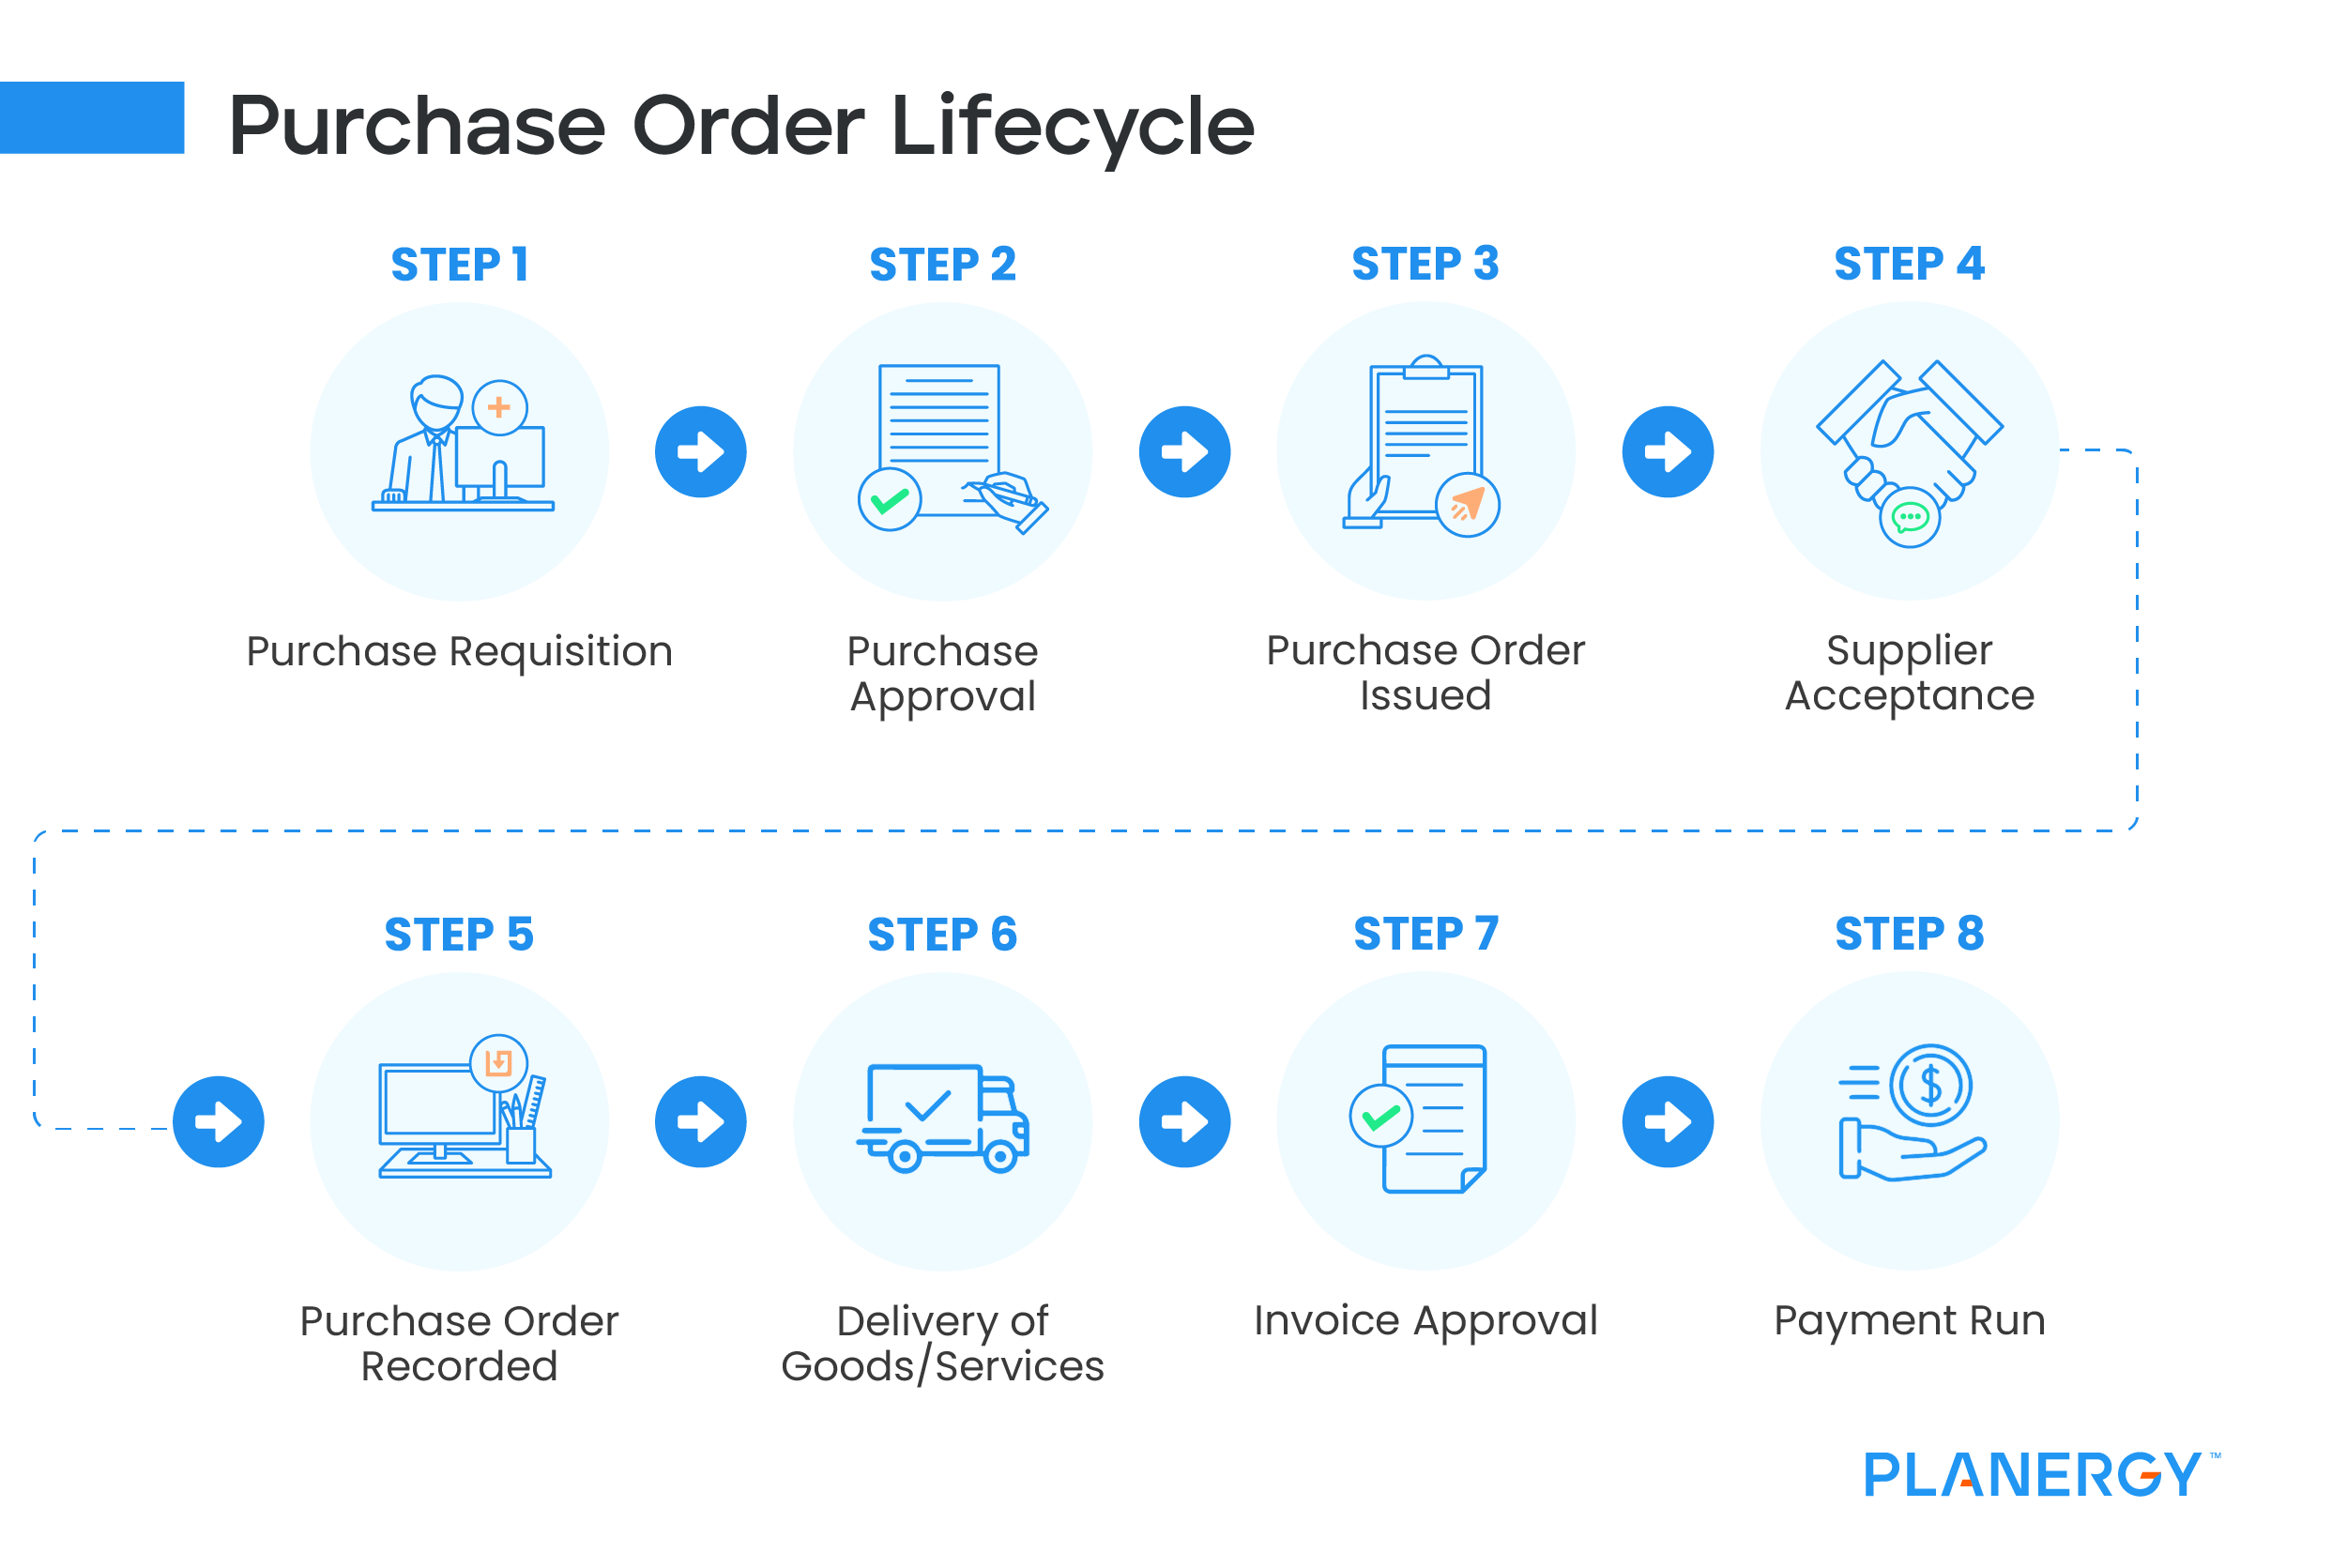 Purchase Order Lifecycle Diagram